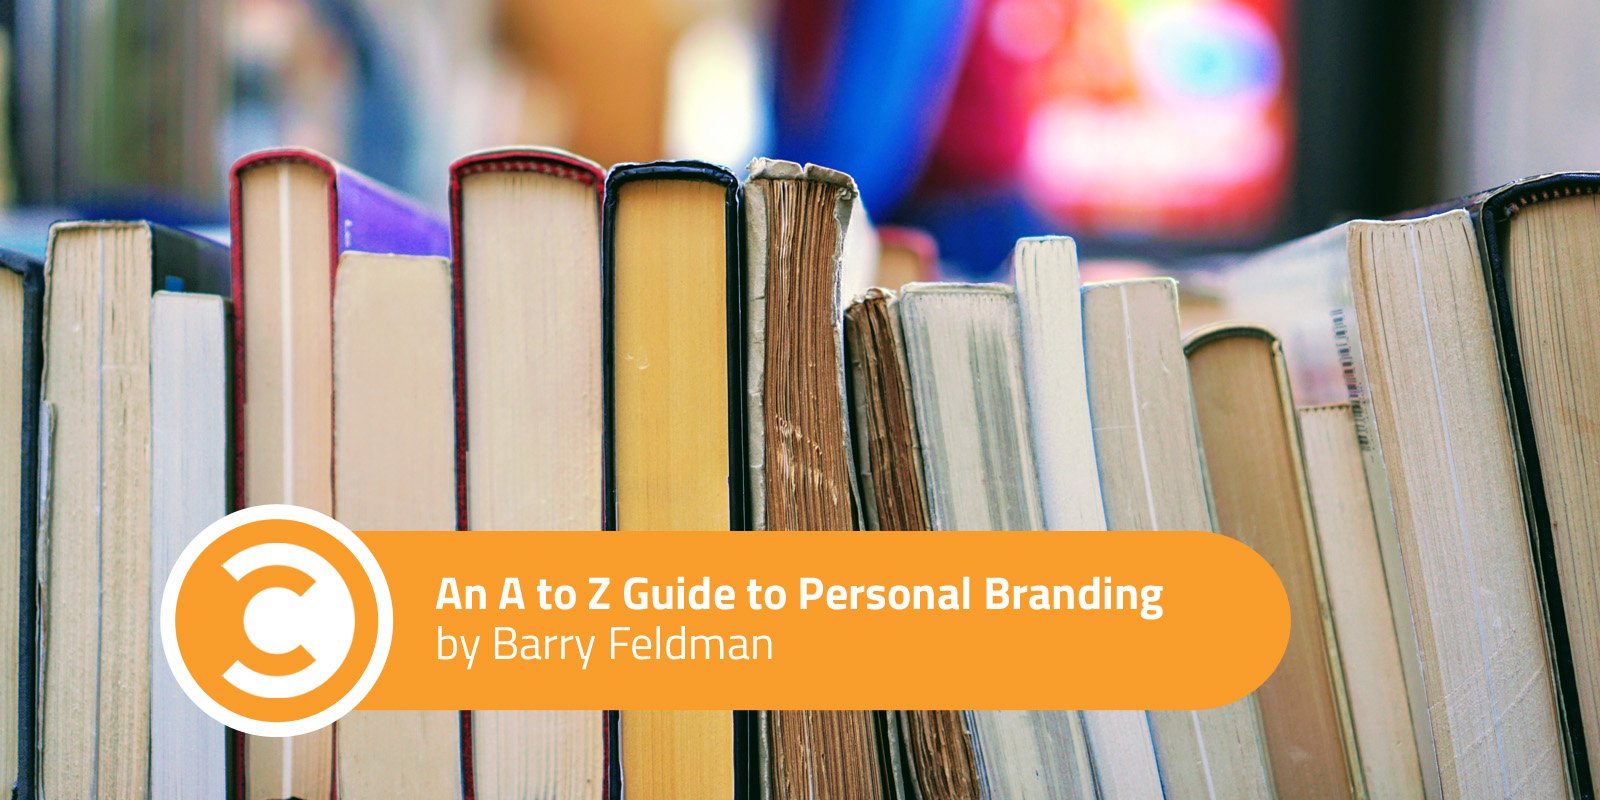 An A to Z Guide to Personal Branding